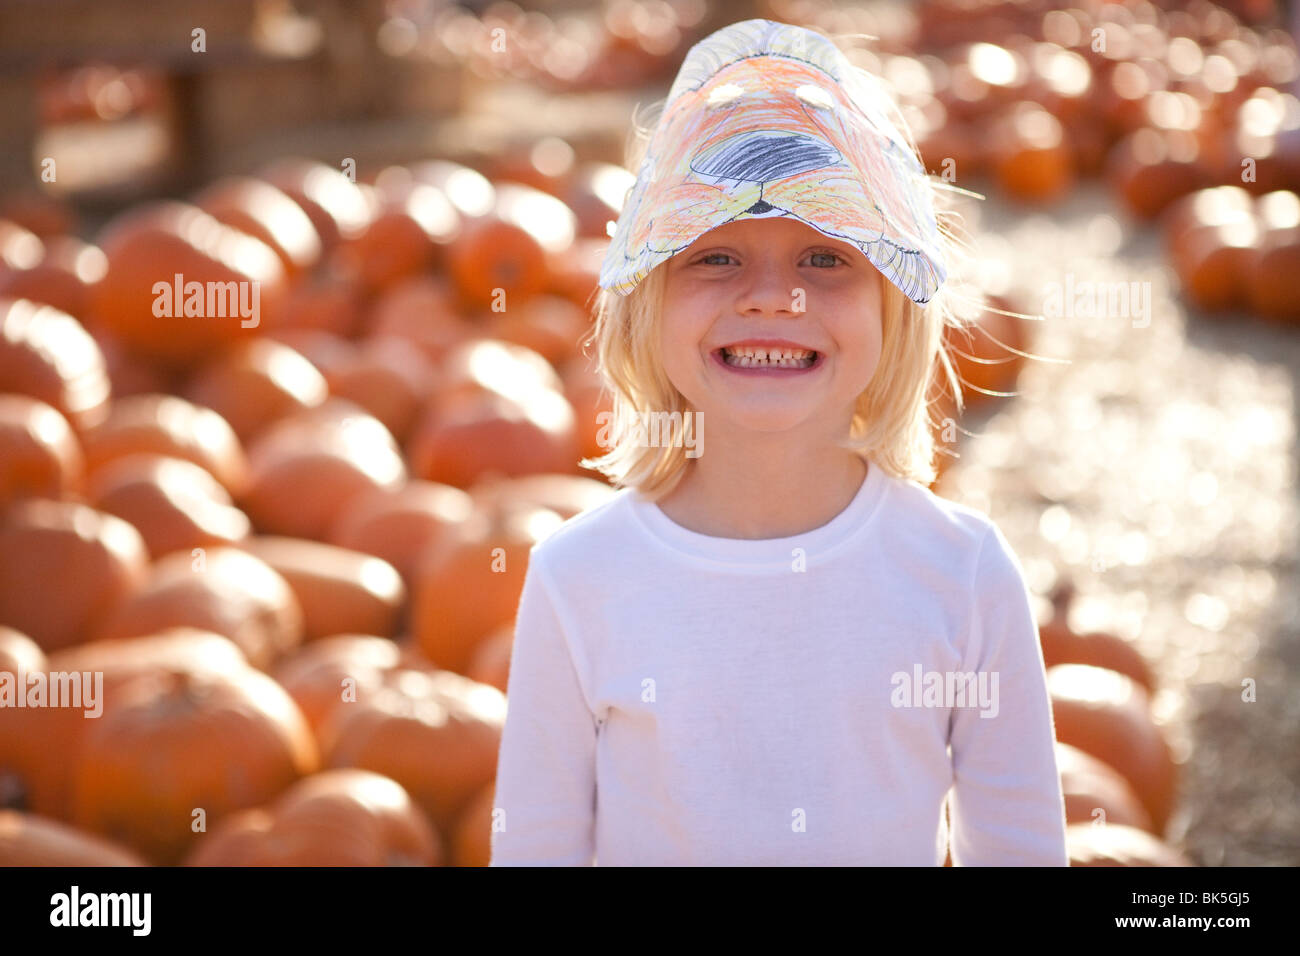 Young girl in pumpkin patch Stock Photo